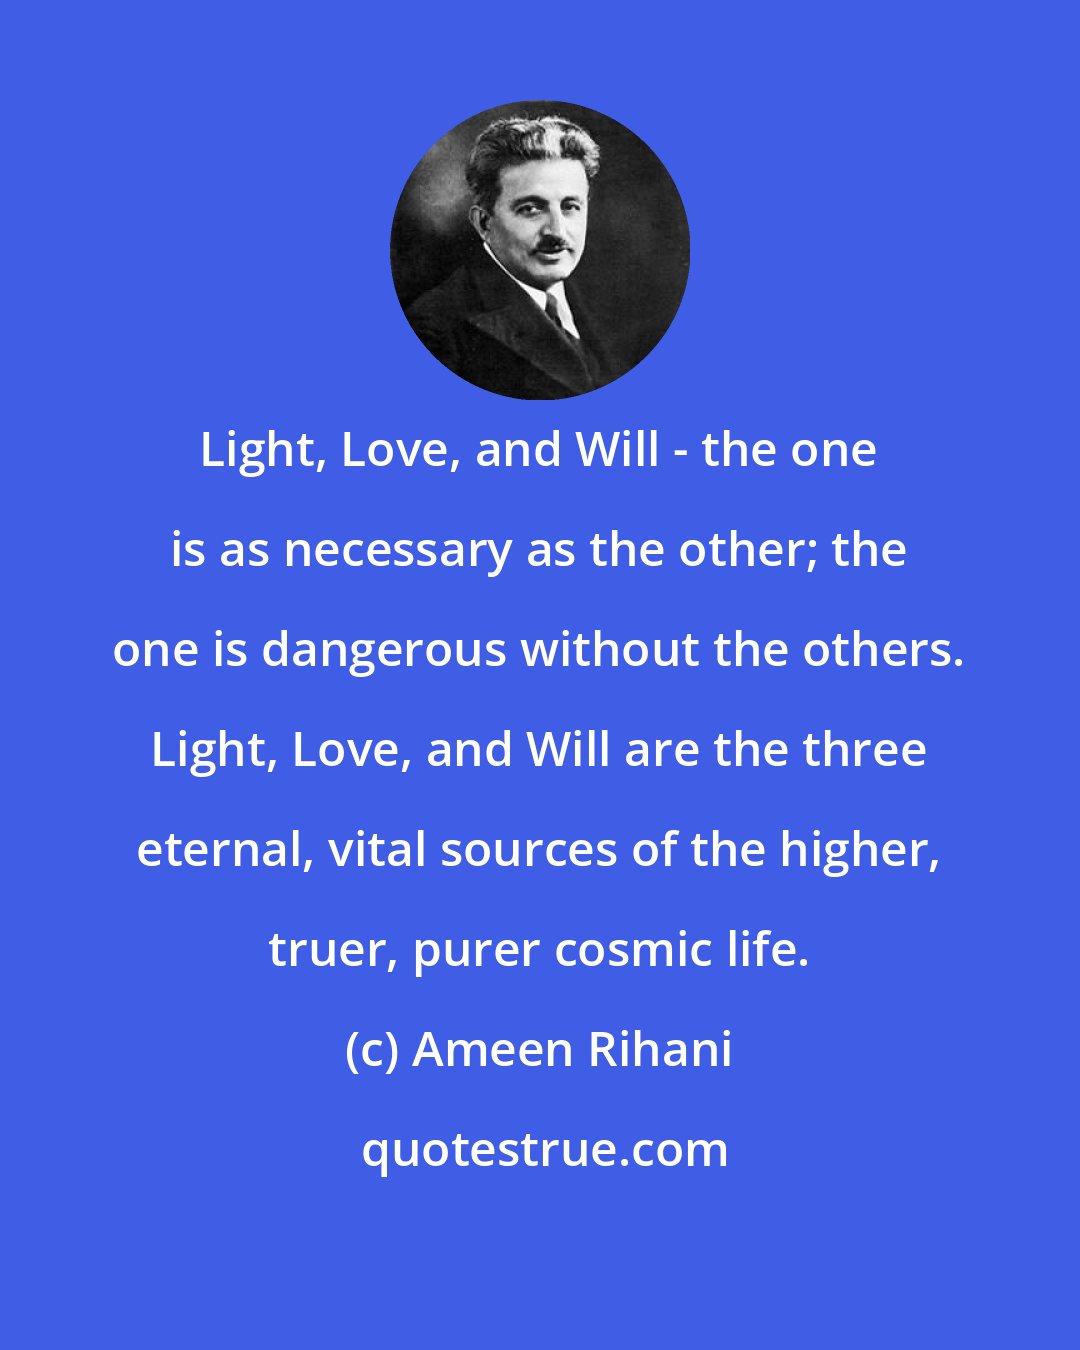 Ameen Rihani: Light, Love, and Will - the one is as necessary as the other; the one is dangerous without the others. Light, Love, and Will are the three eternal, vital sources of the higher, truer, purer cosmic life.